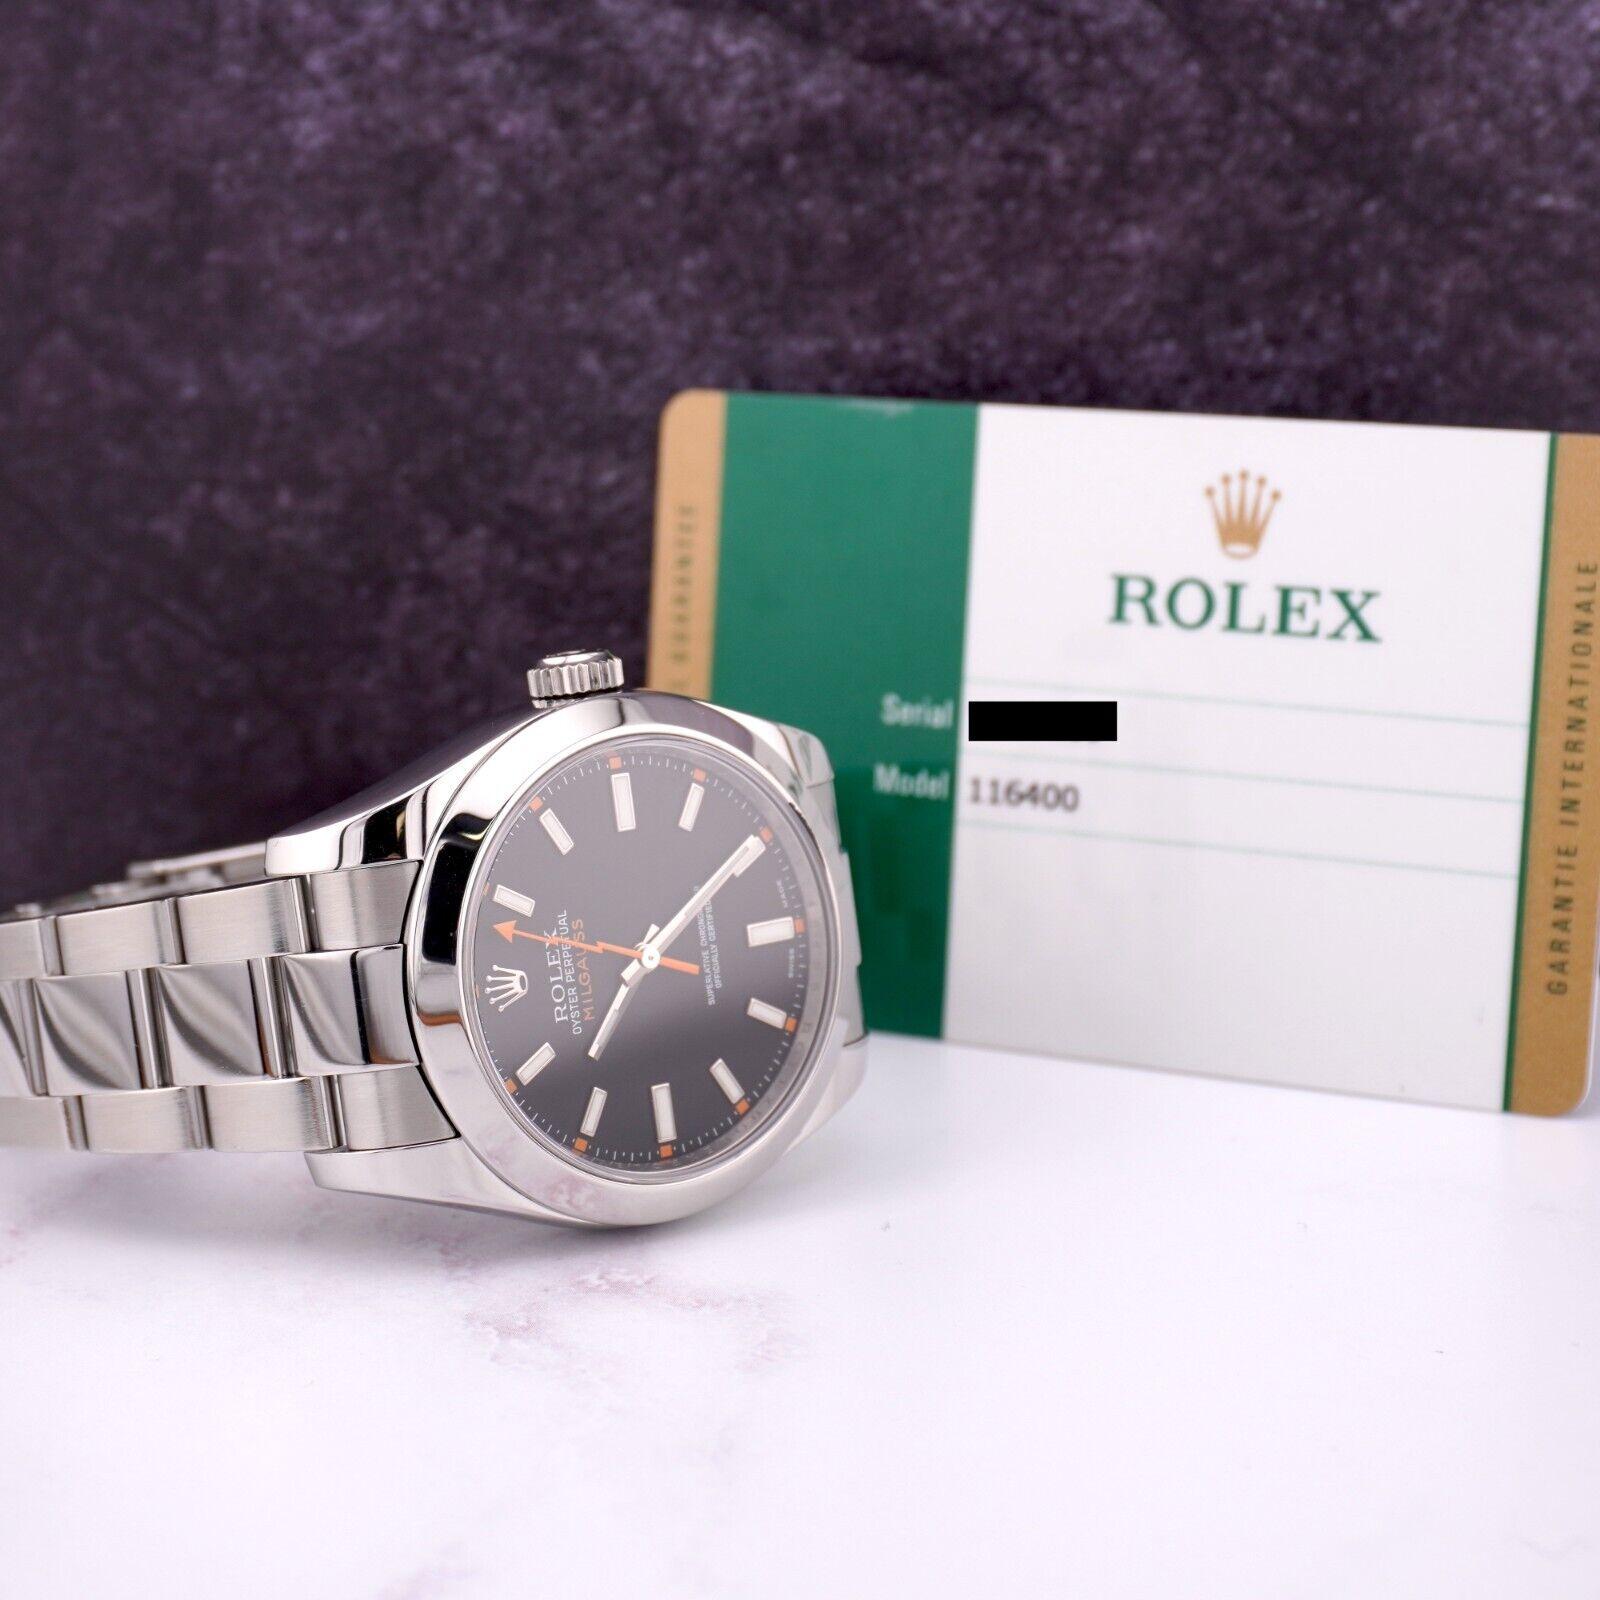 Rolex 40mm Milgauss Men's Black Dial Steel Thunderbolt Watch BOX & PAPERS 116400 For Sale 2